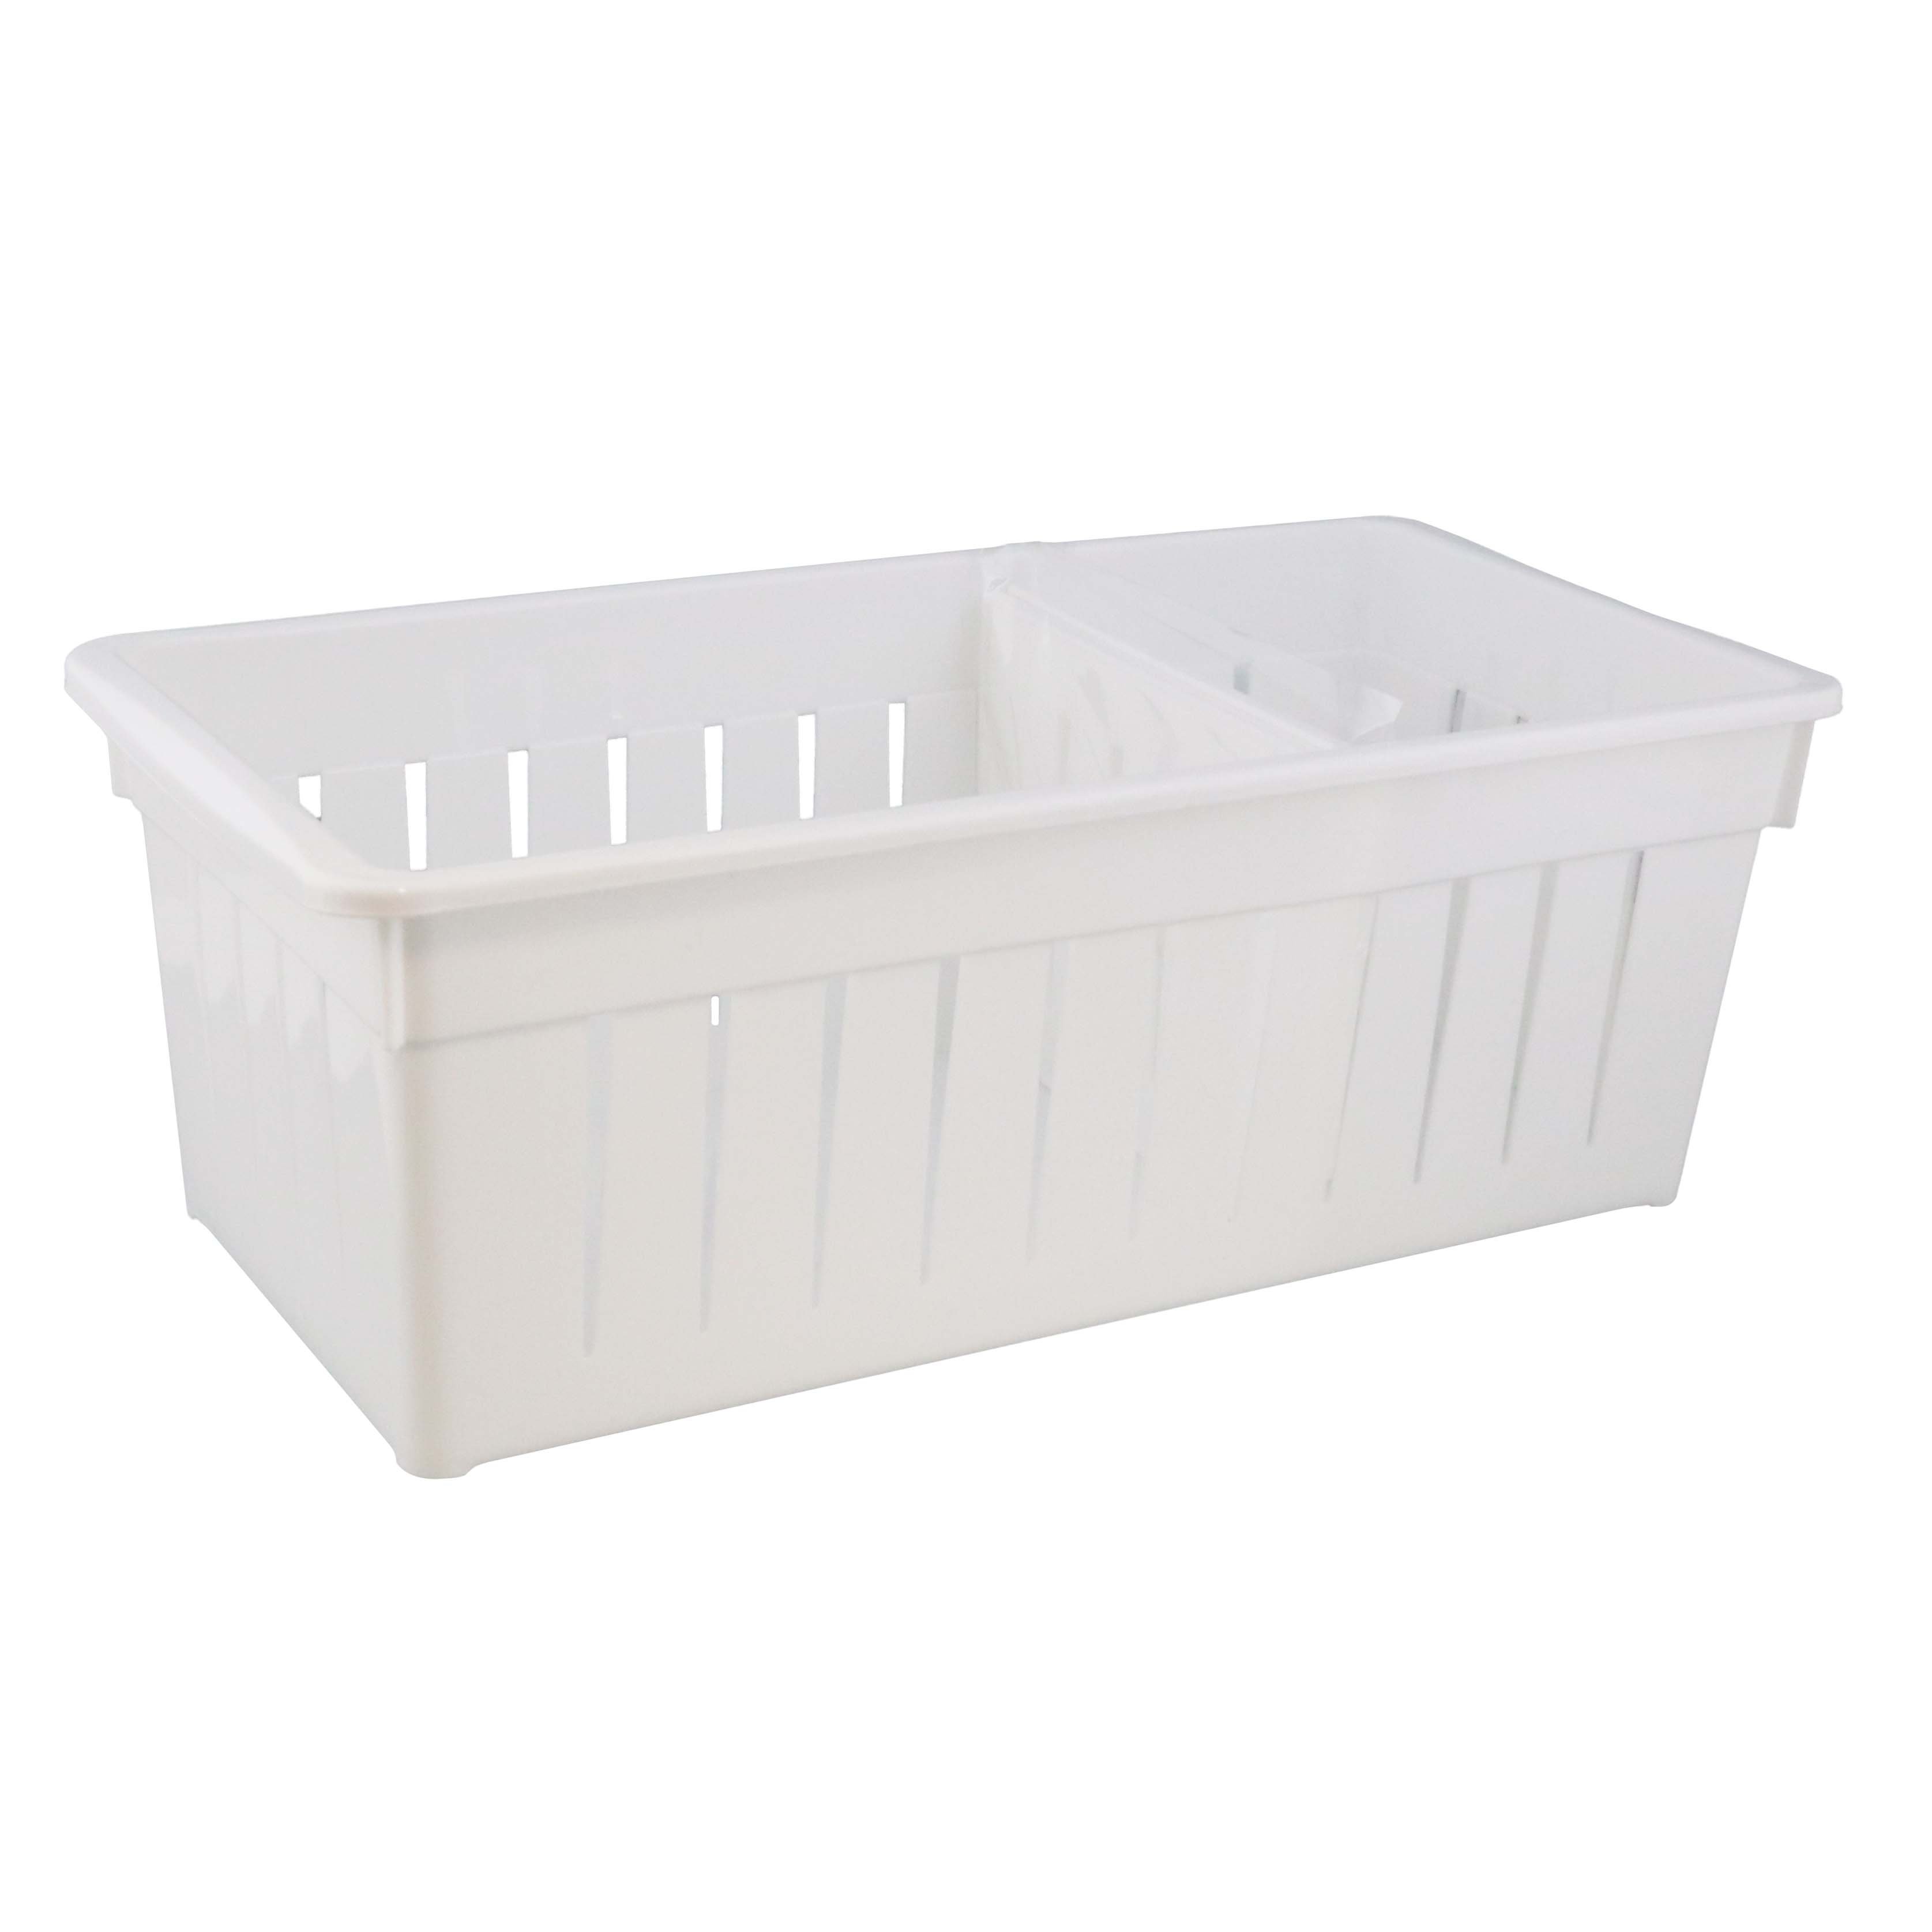 Home Concepts Mint Tall Storage Basket with Dividers